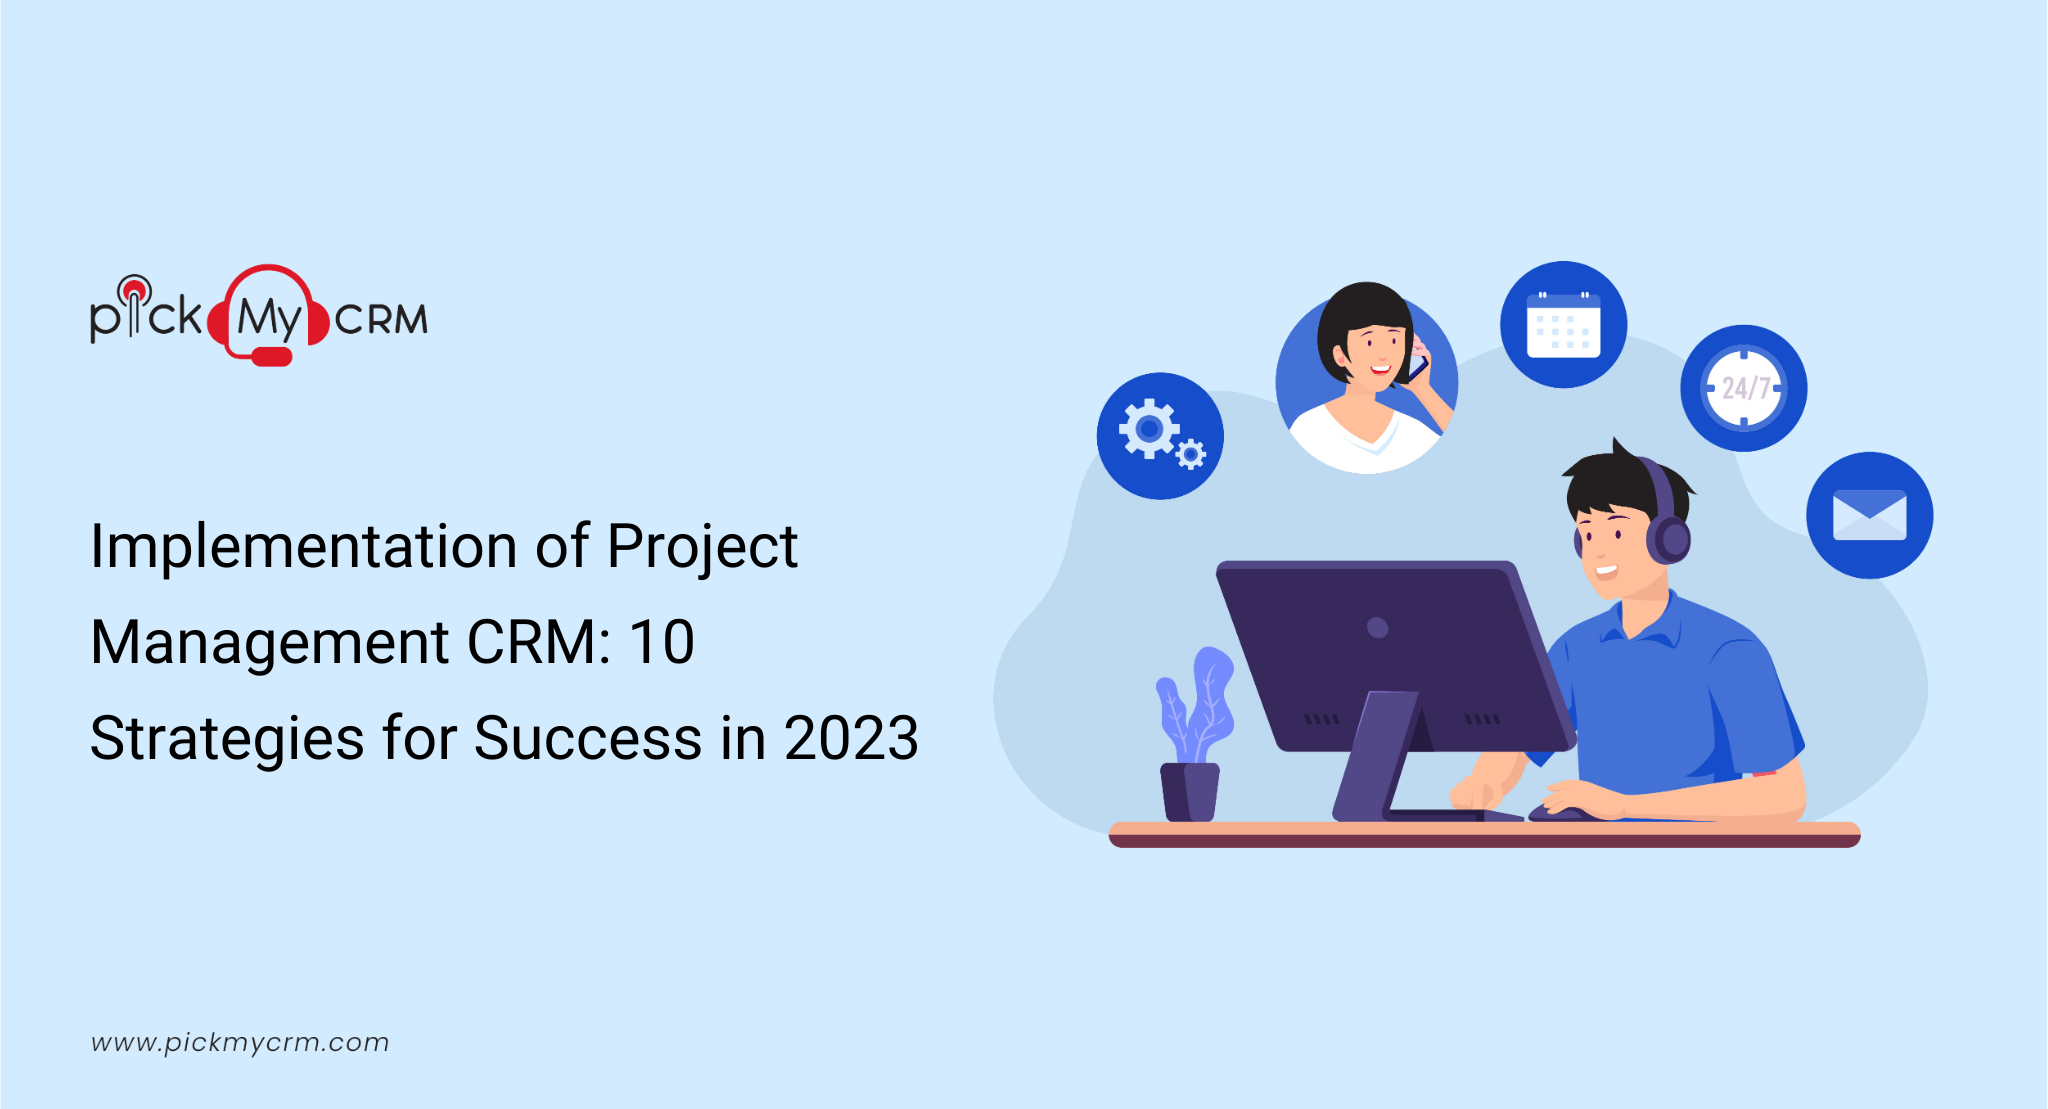 Implementation of Project Management CRM: 10 Strategies for Success in 2023